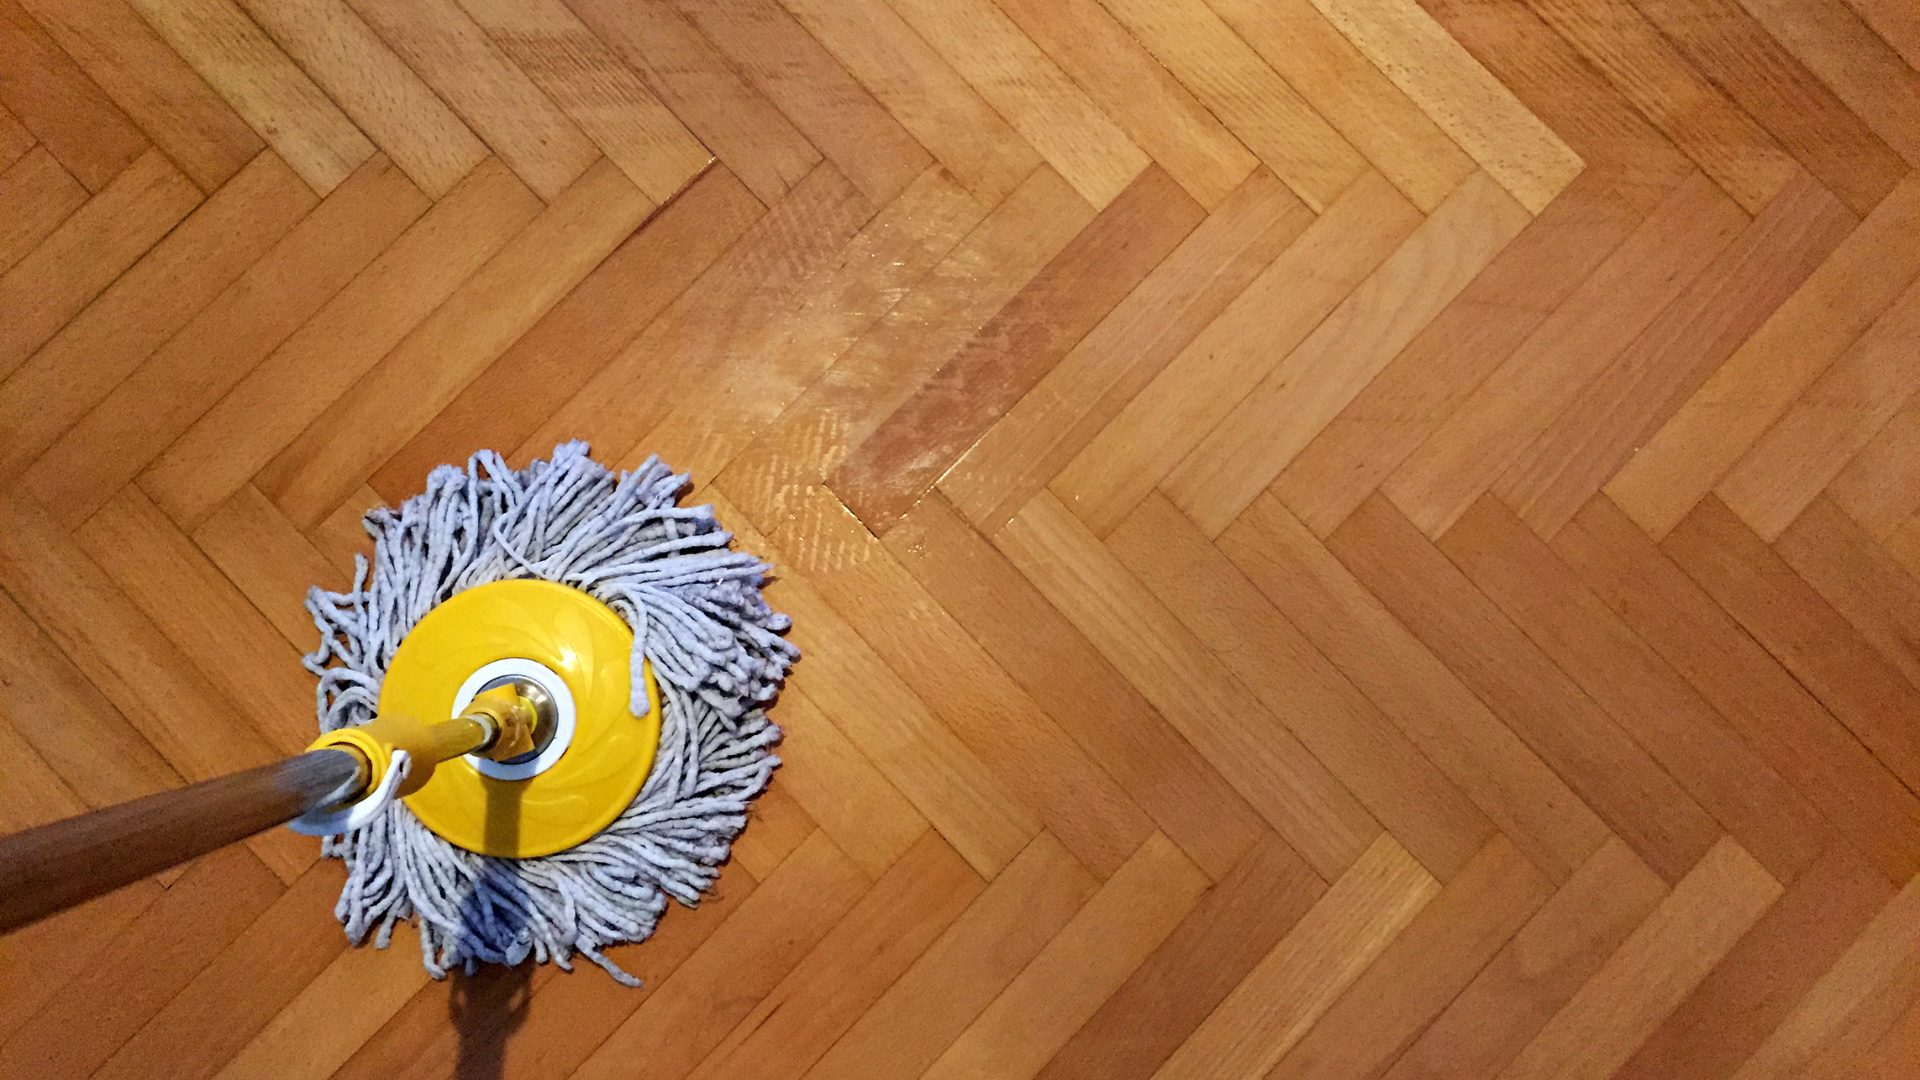 How To Properly Clean Floors Laminate